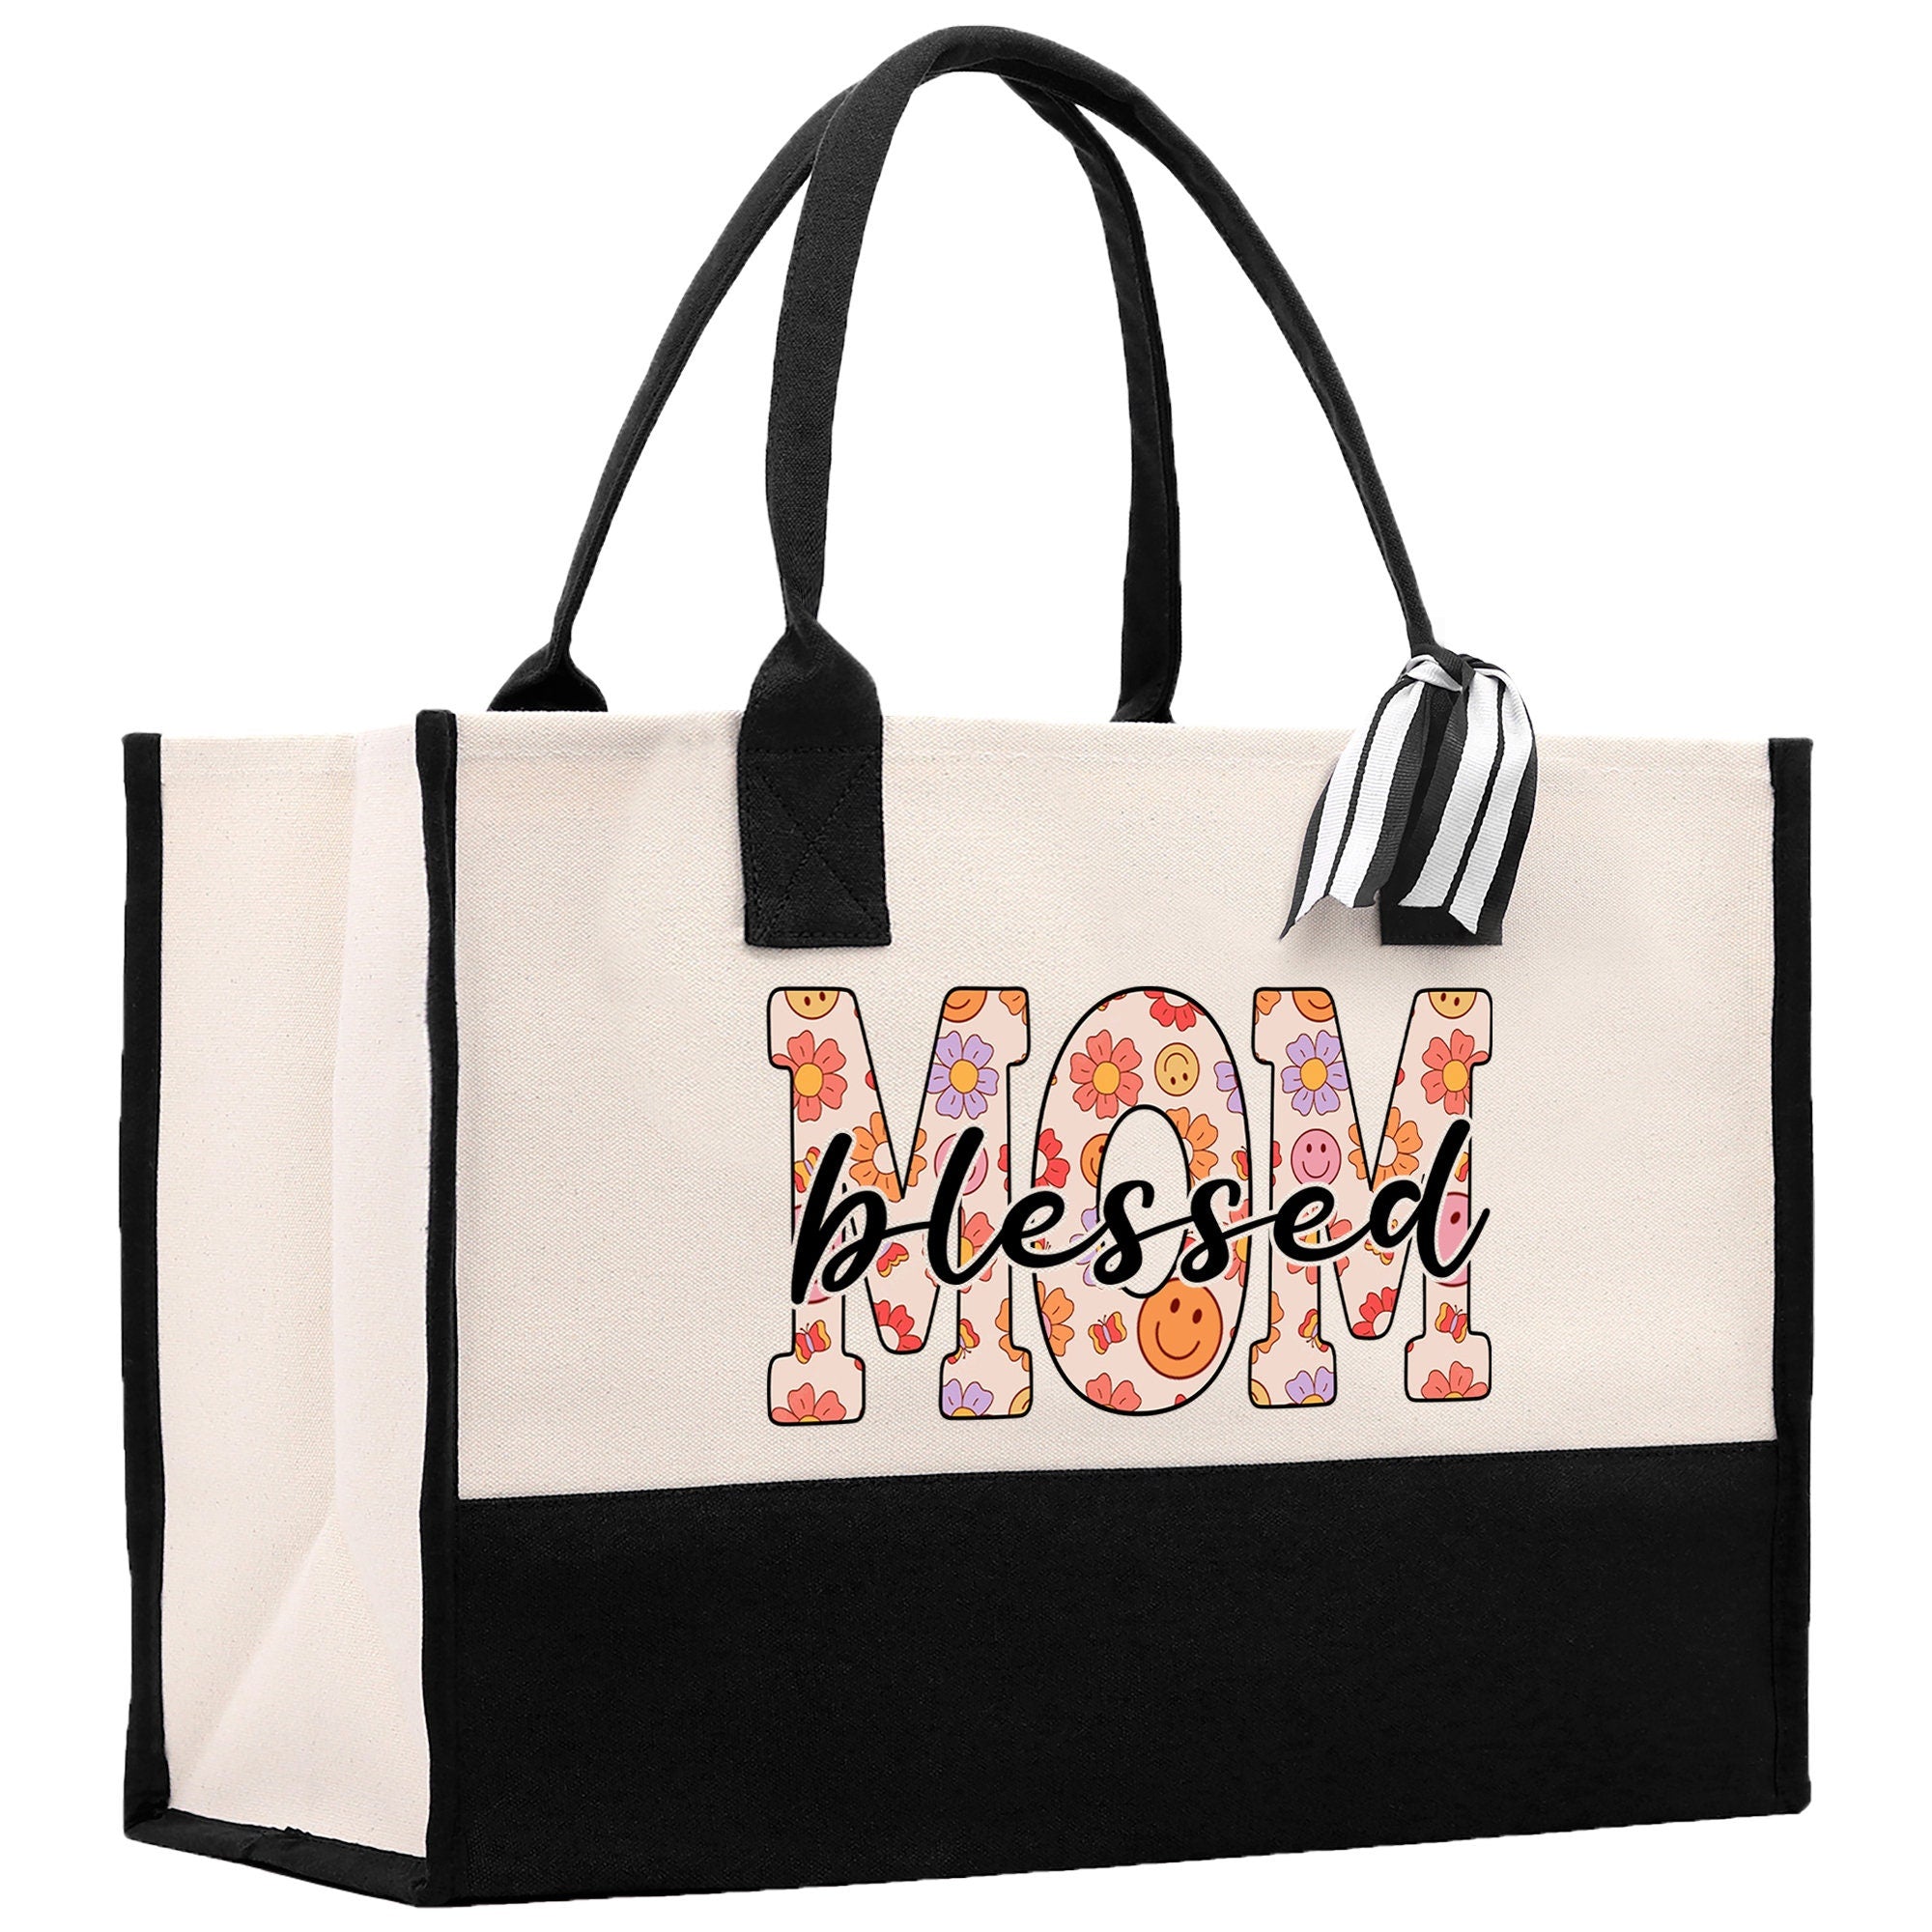 a black and white tote bag with the word mom on it